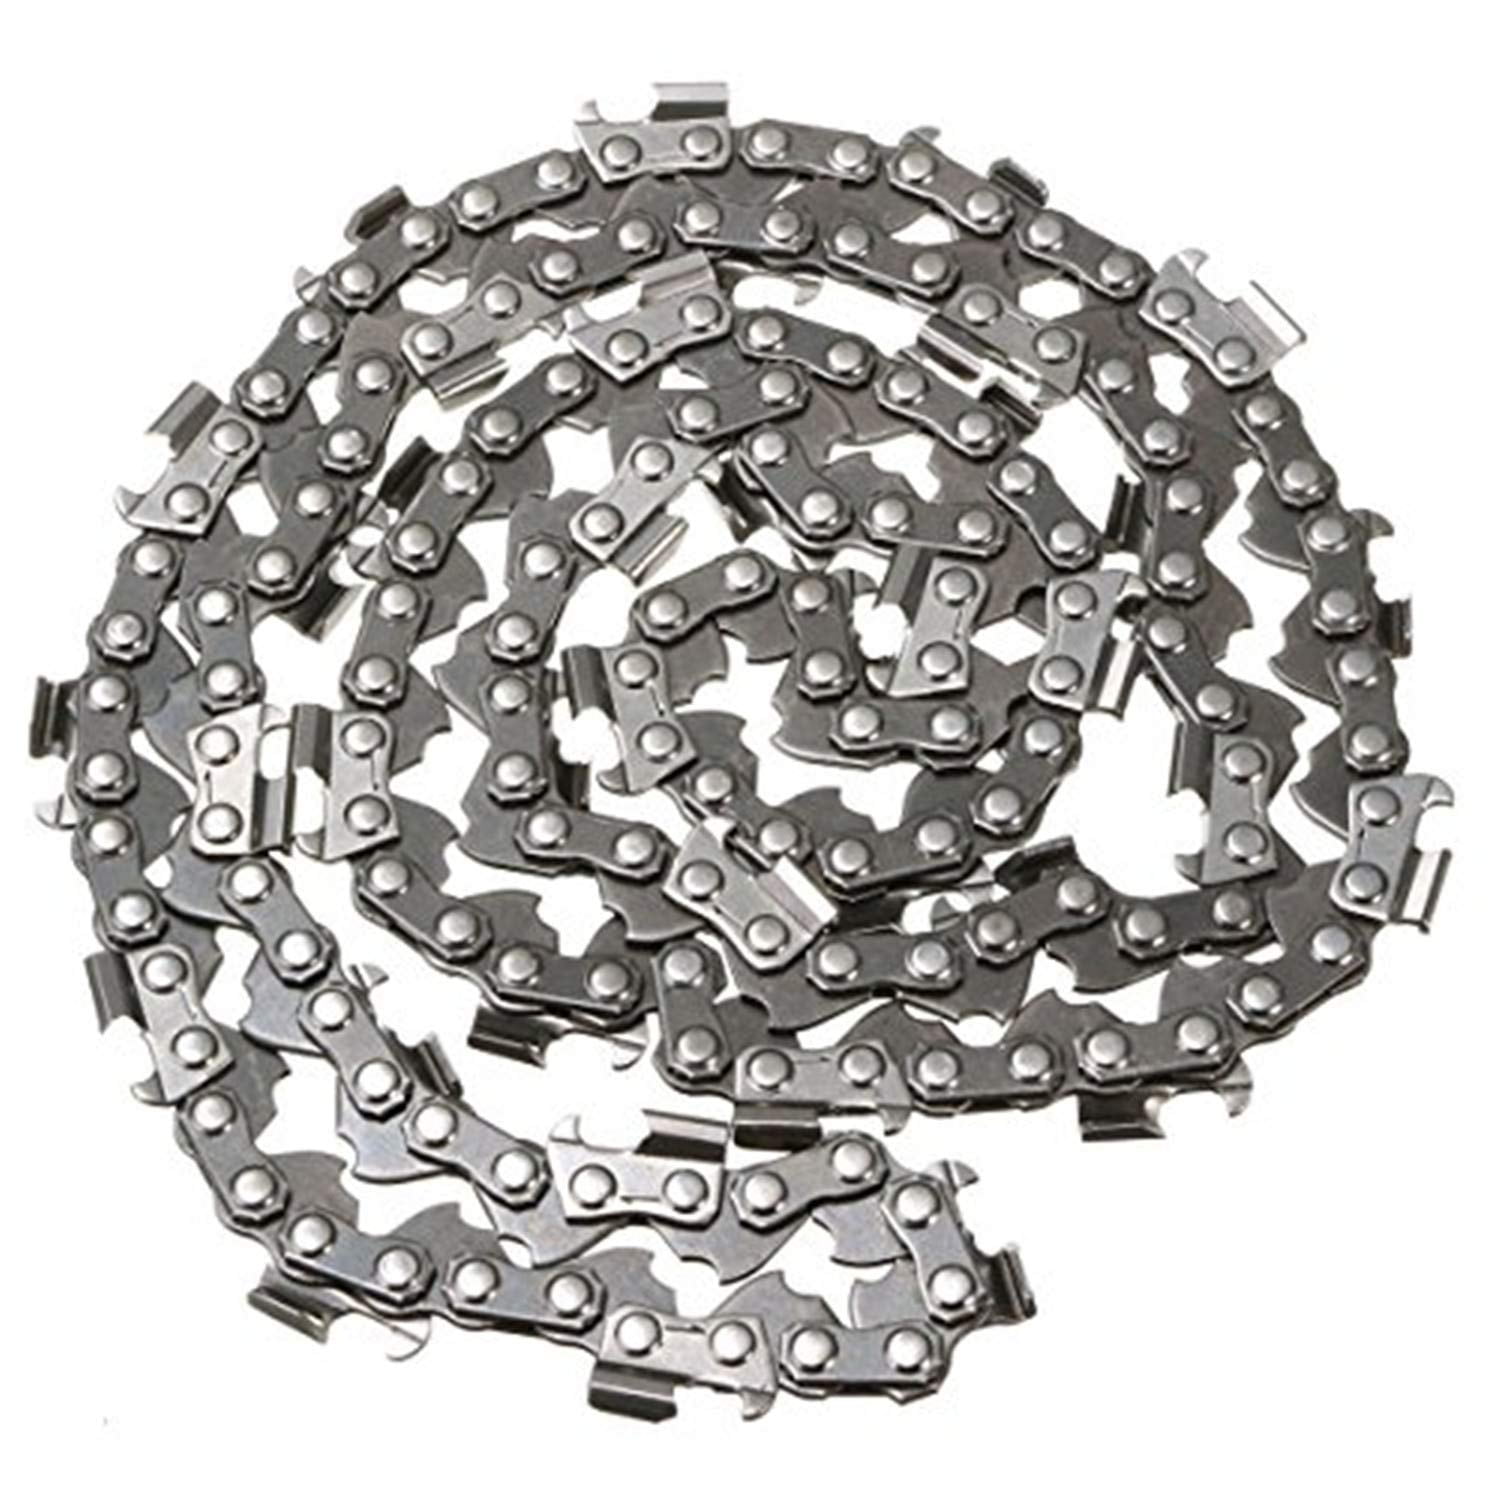 c 2Pcs 20 inch 76 Links Chainsaw Saw Chain Parts For Timberpro 62CC 0.325 